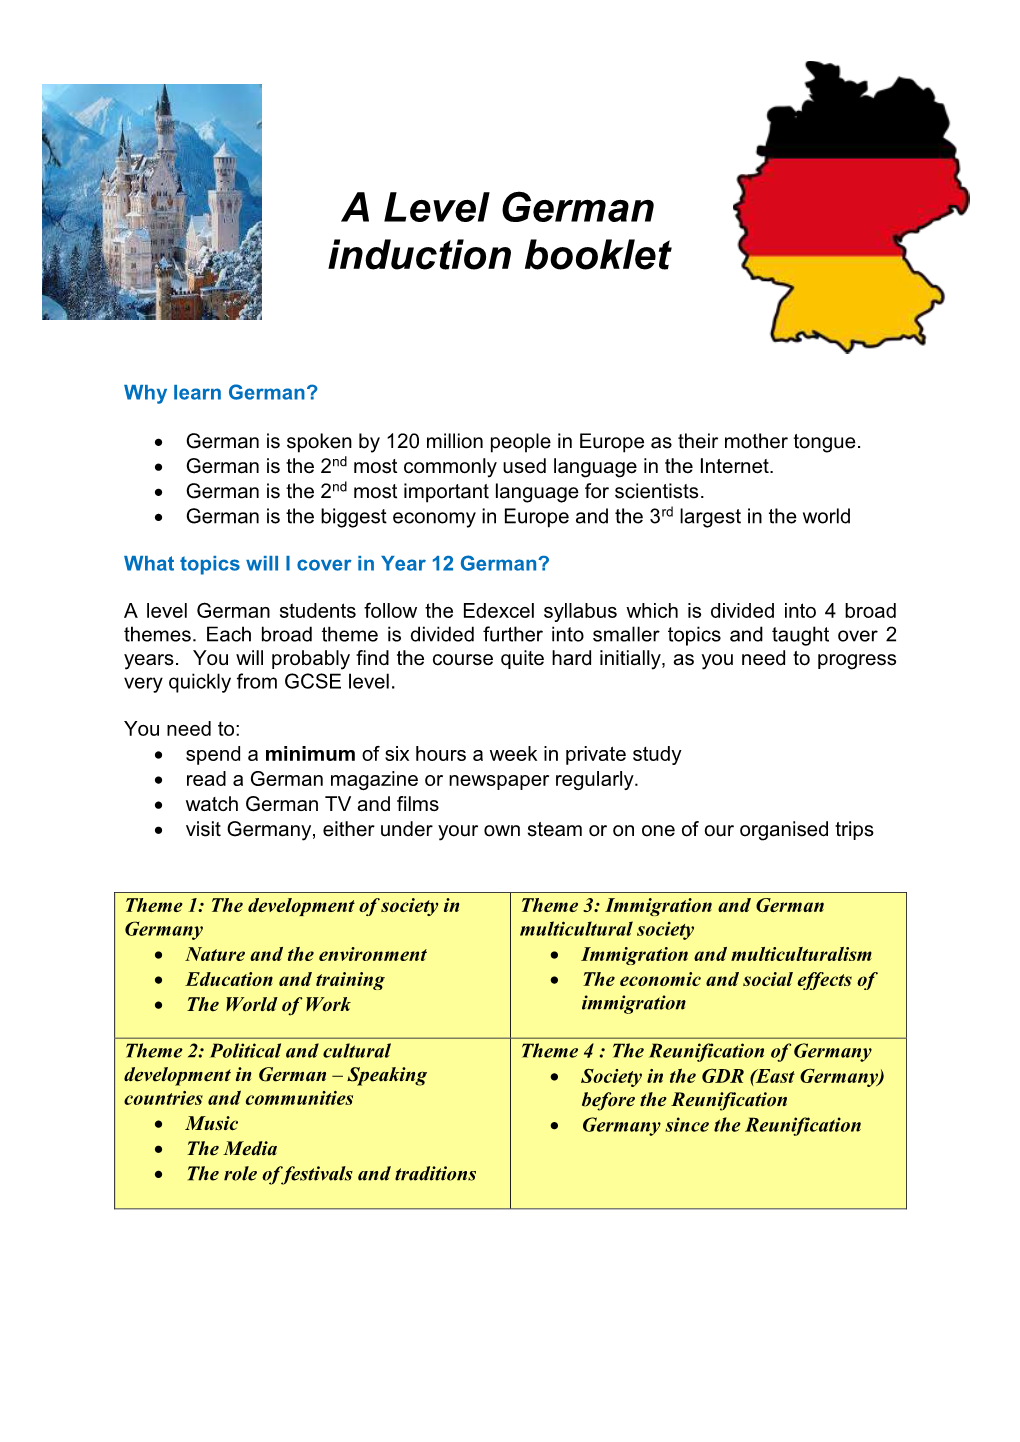 A Level German Induction Booklet